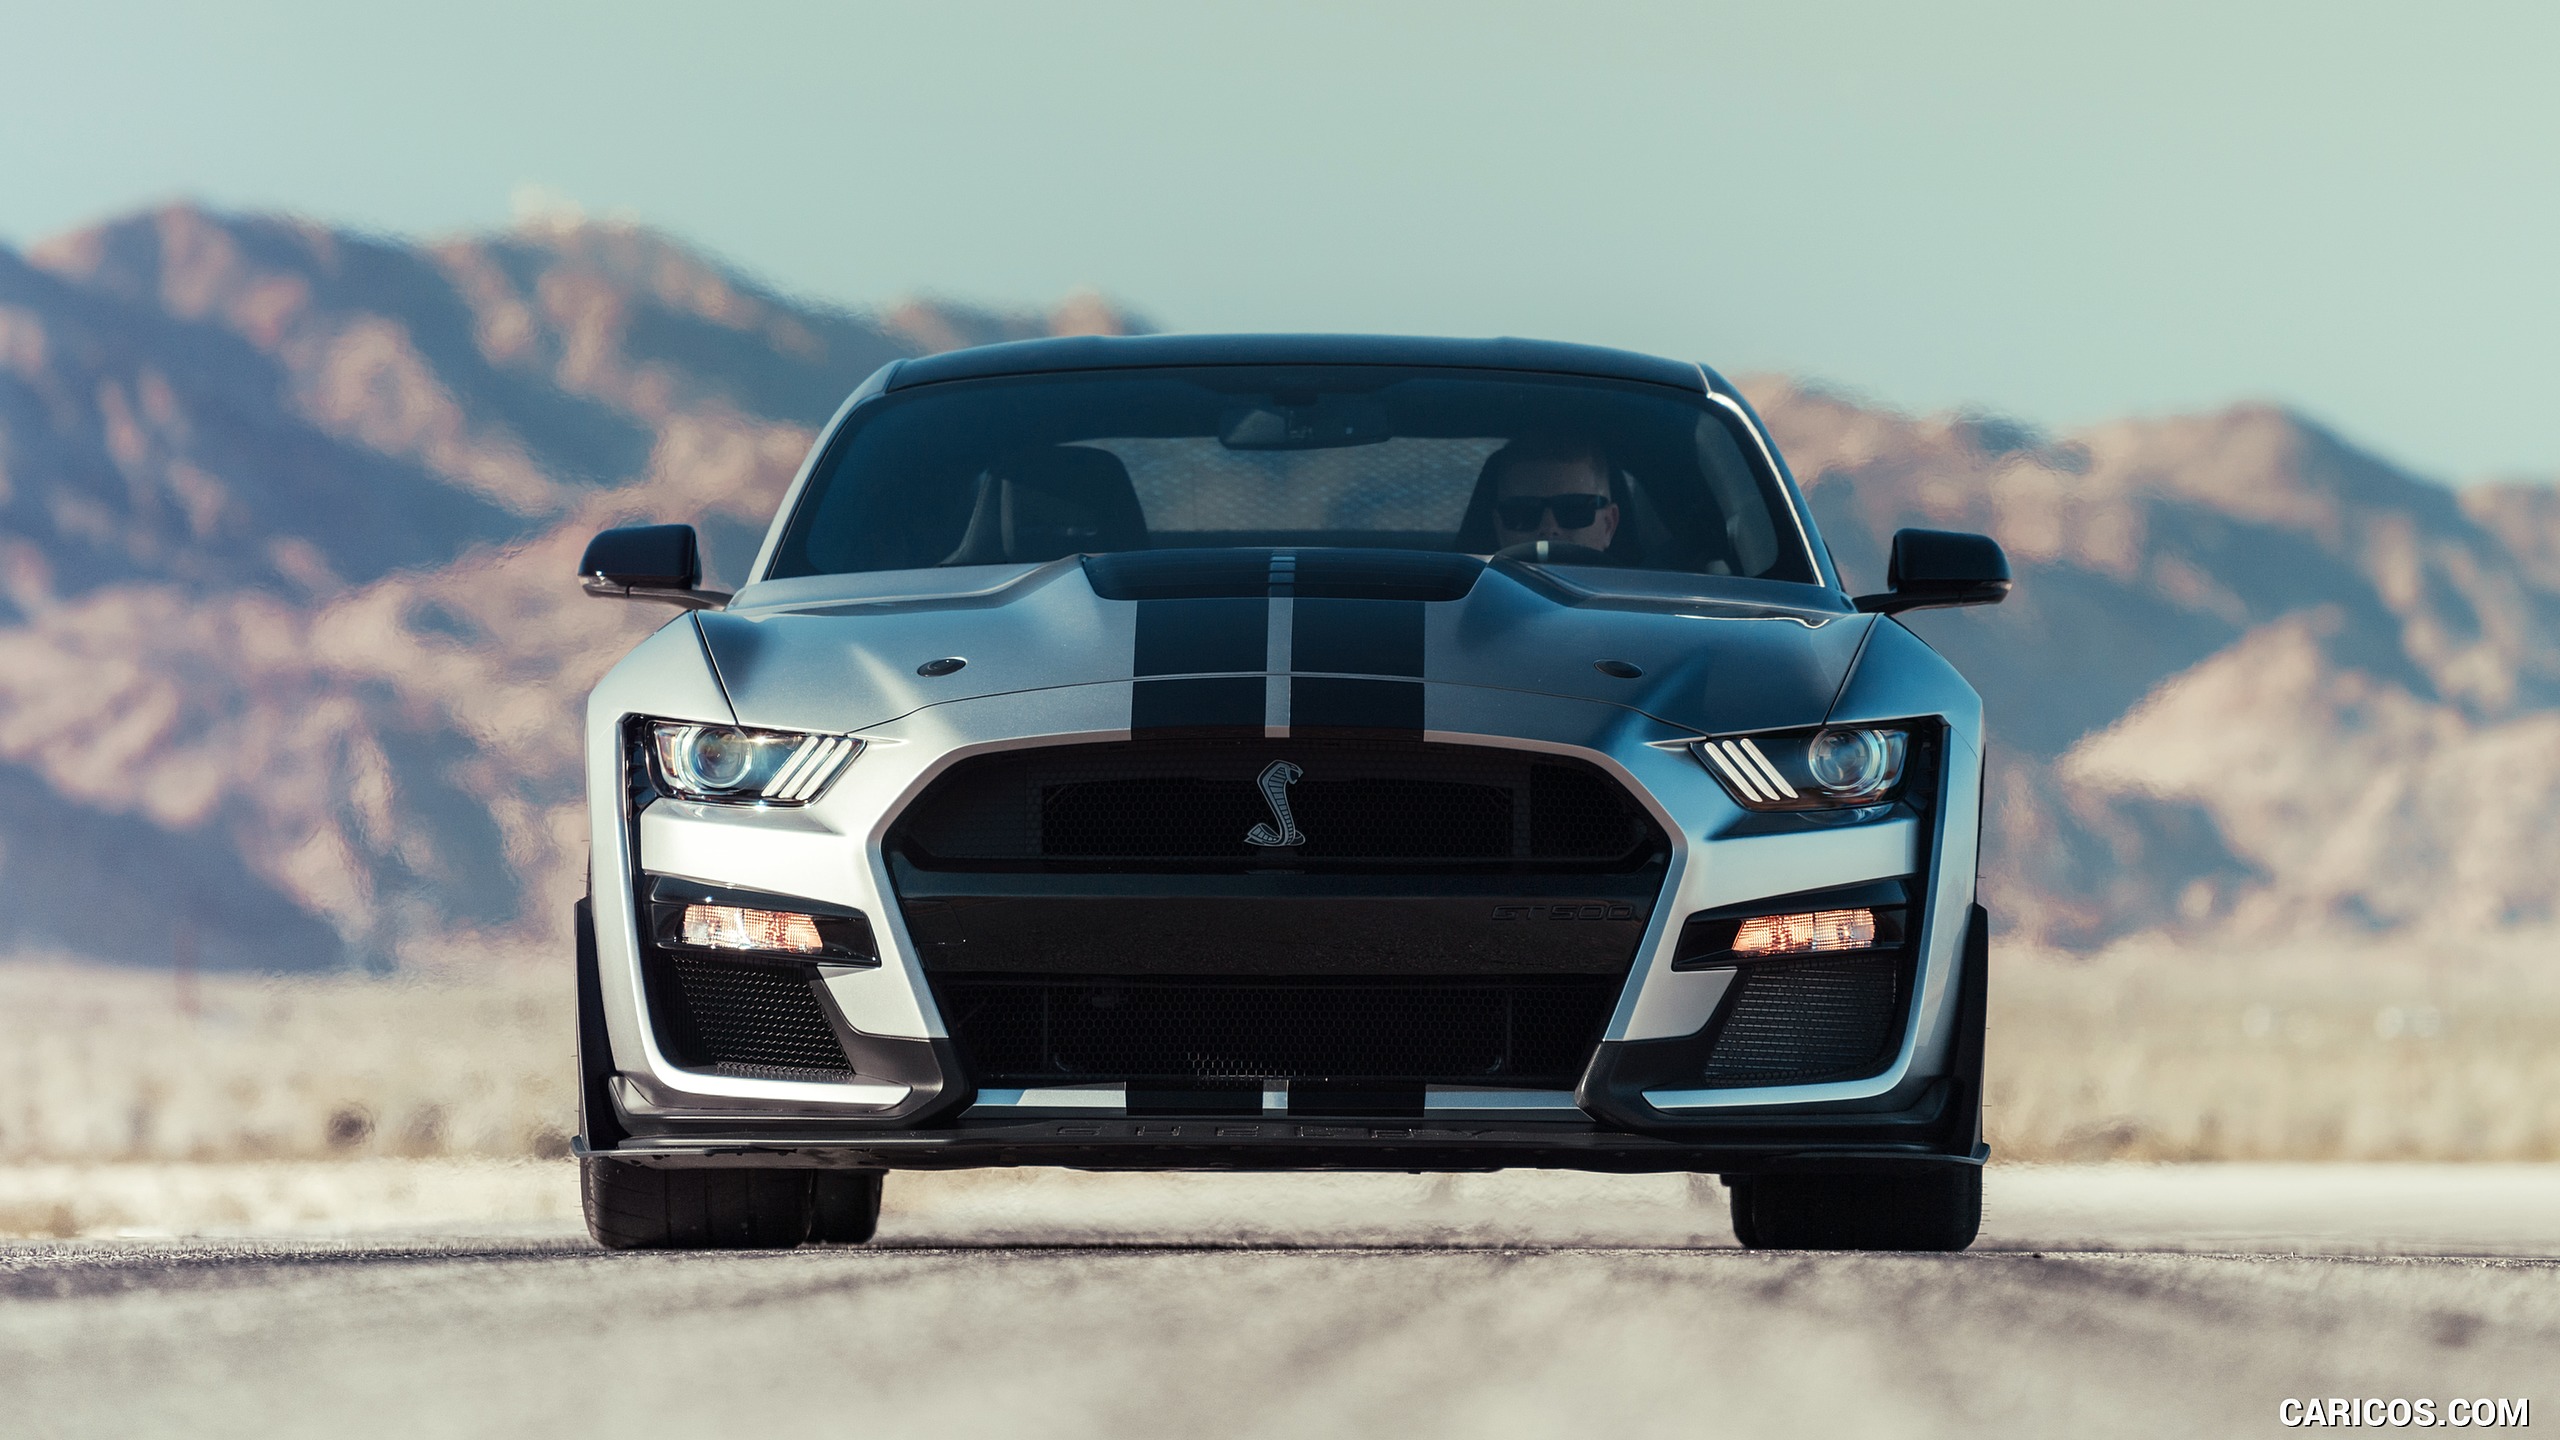 Ford Mustang Shelby Gt500 Front HD Wallpaper